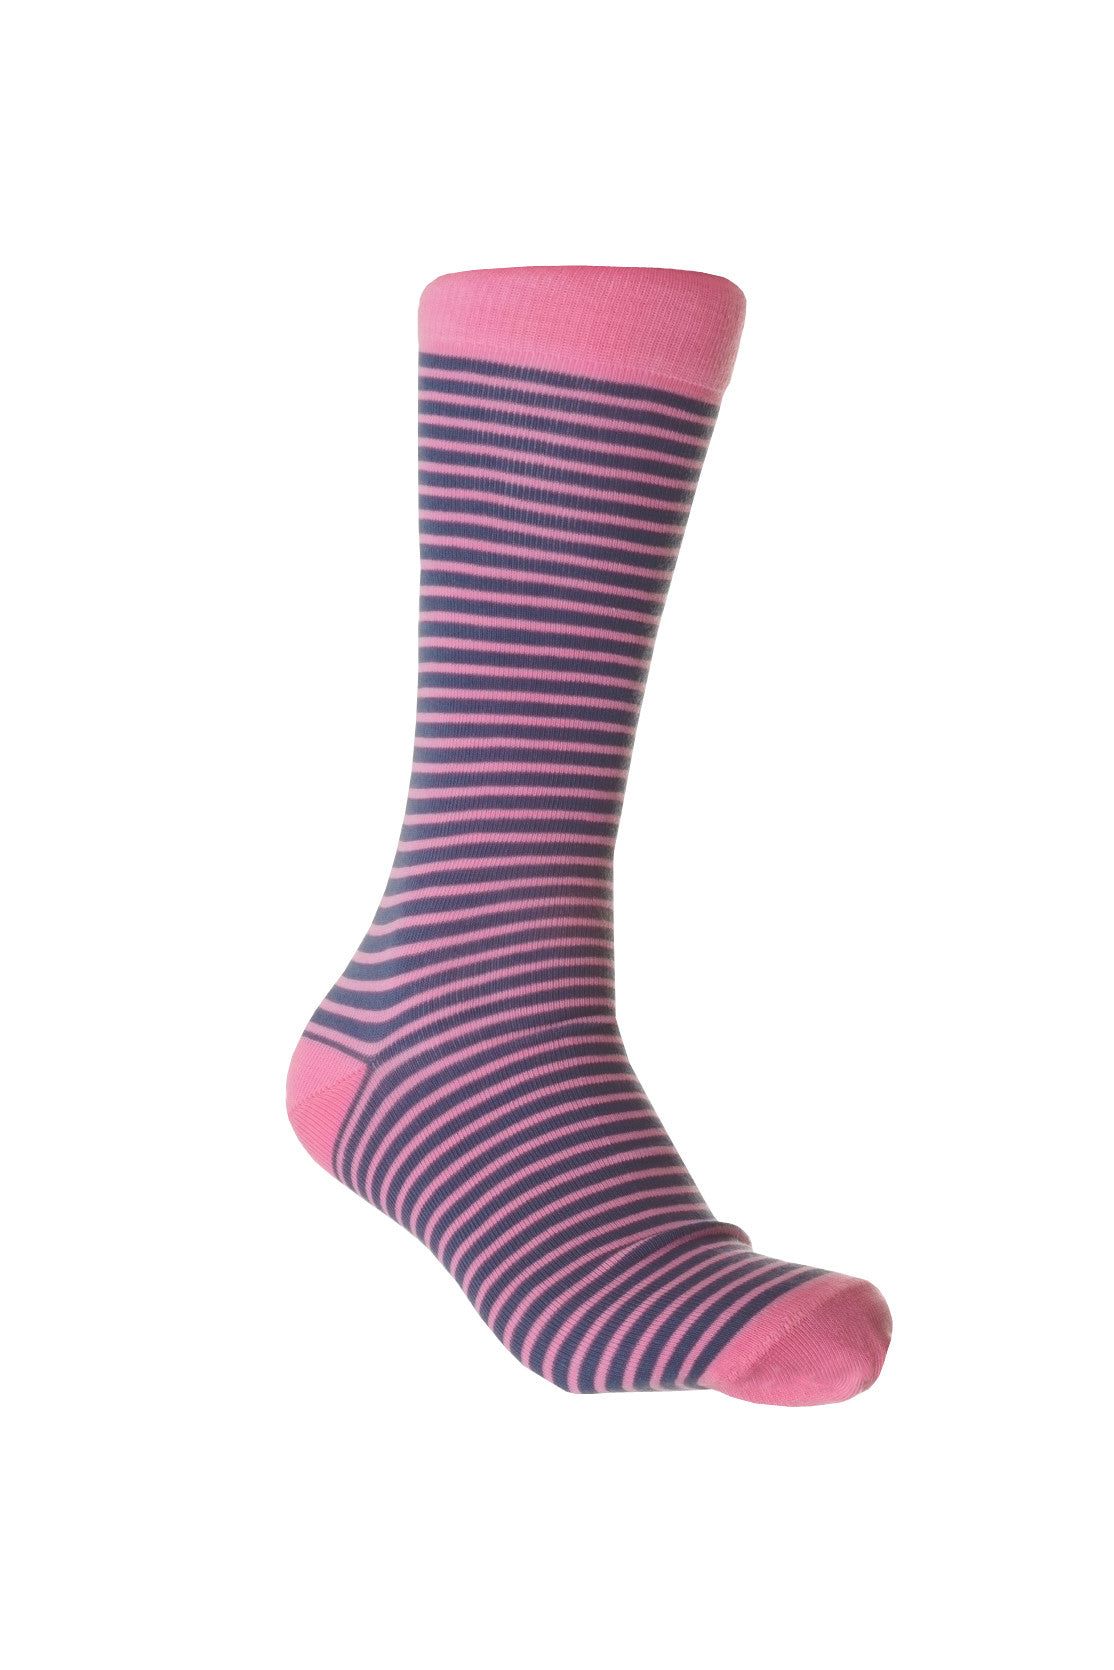 Giraffe Cool | Blue And Pink Stripes Brushed Cotton Socks Foot Front